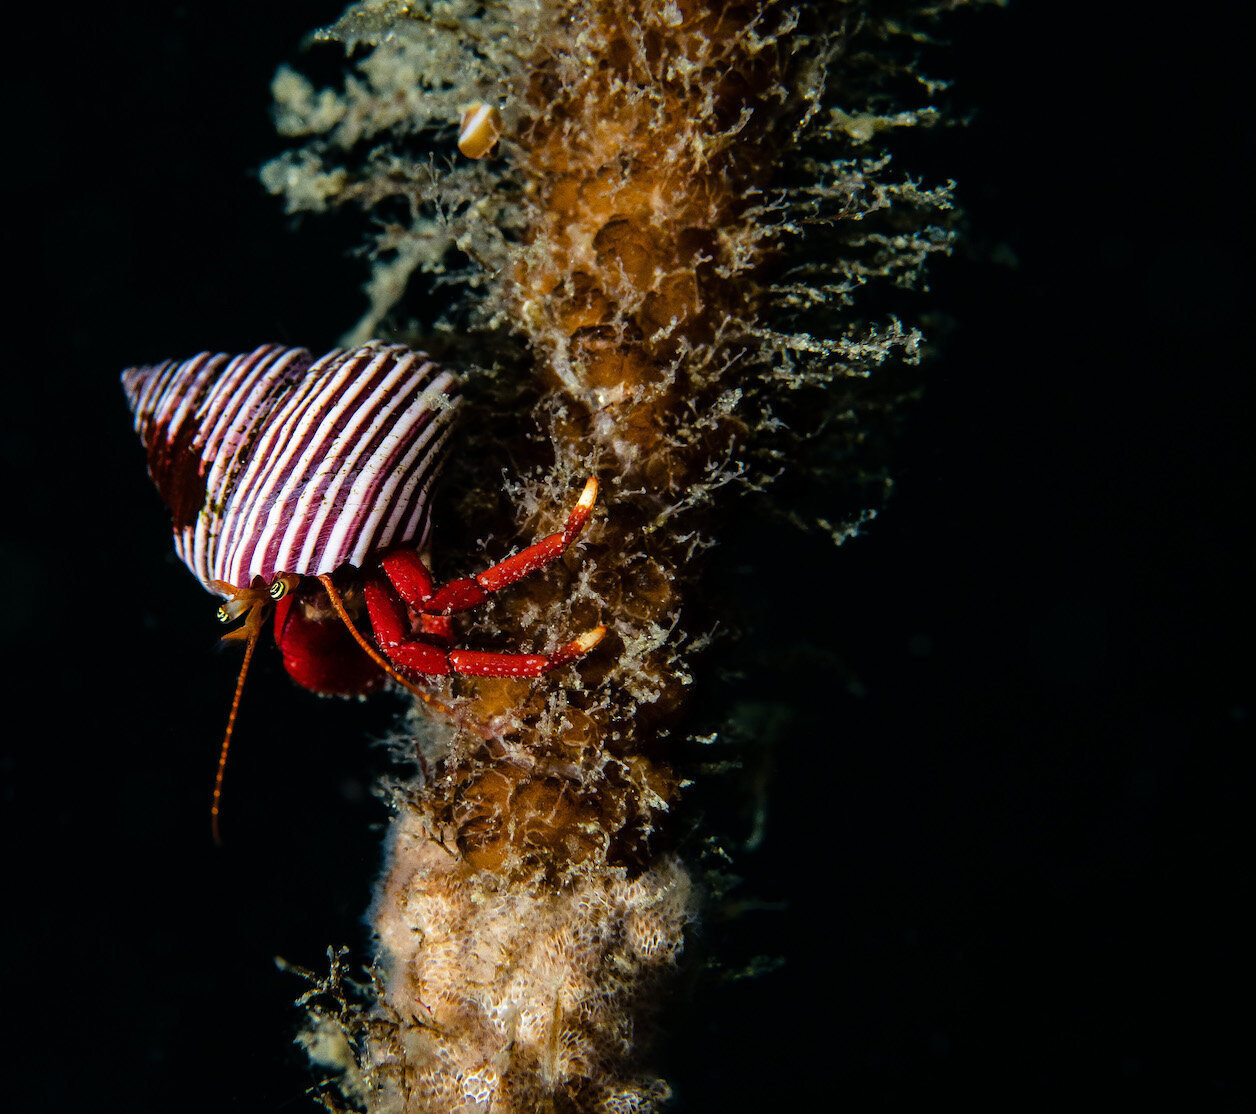 British Columbia Hermit Crab in Kelp Forest by Laura Tesler